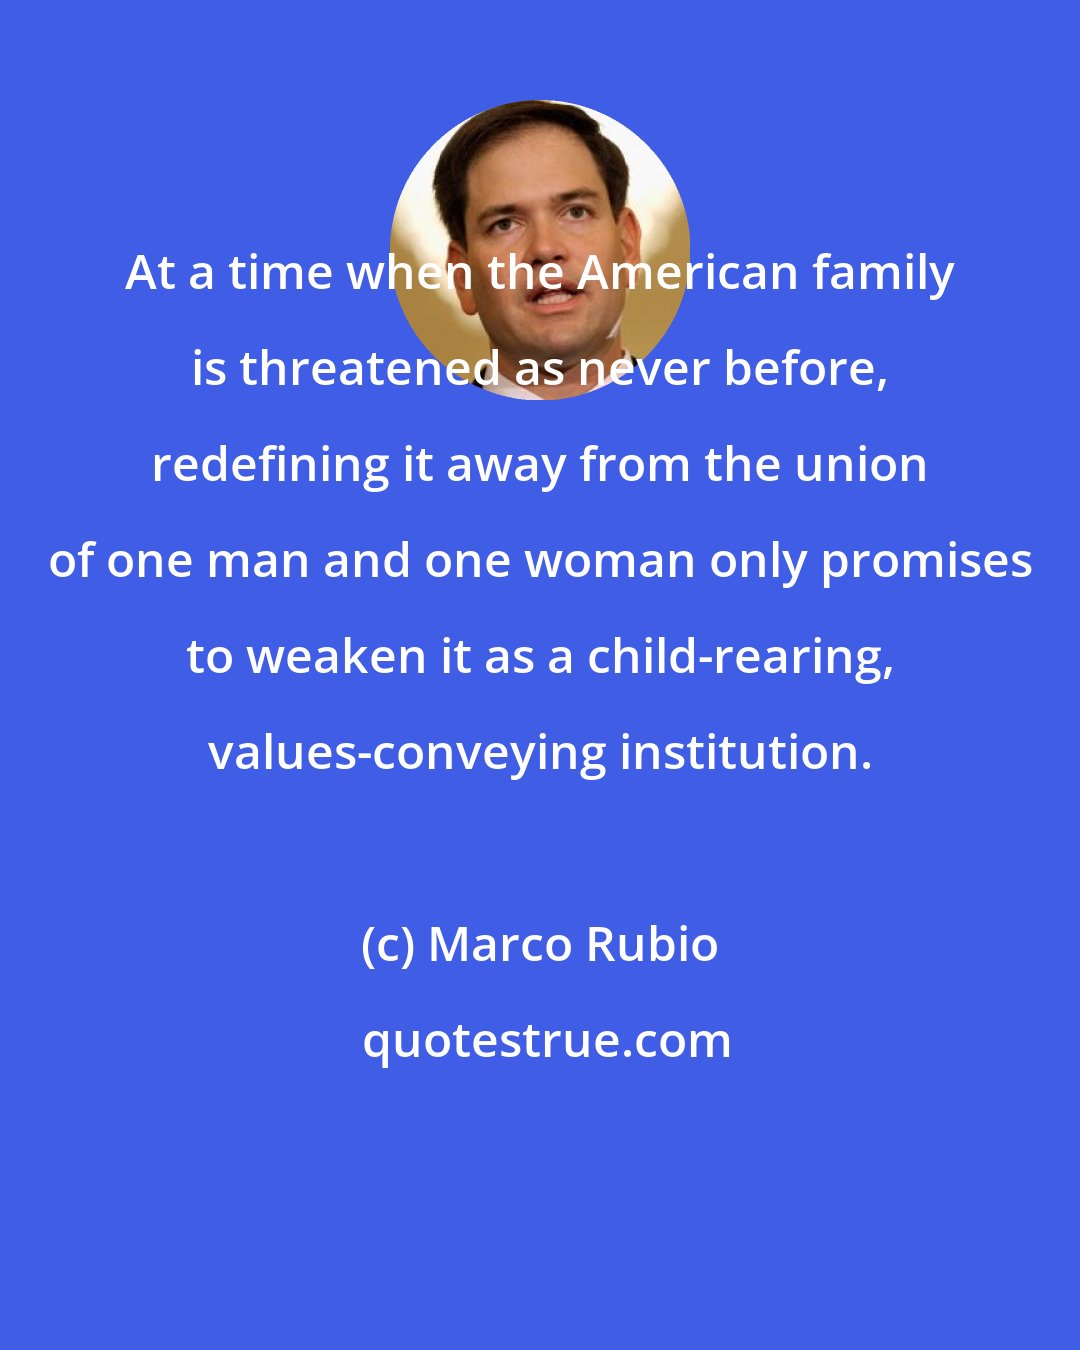 Marco Rubio: At a time when the American family is threatened as never before, redefining it away from the union of one man and one woman only promises to weaken it as a child-rearing, values-conveying institution.